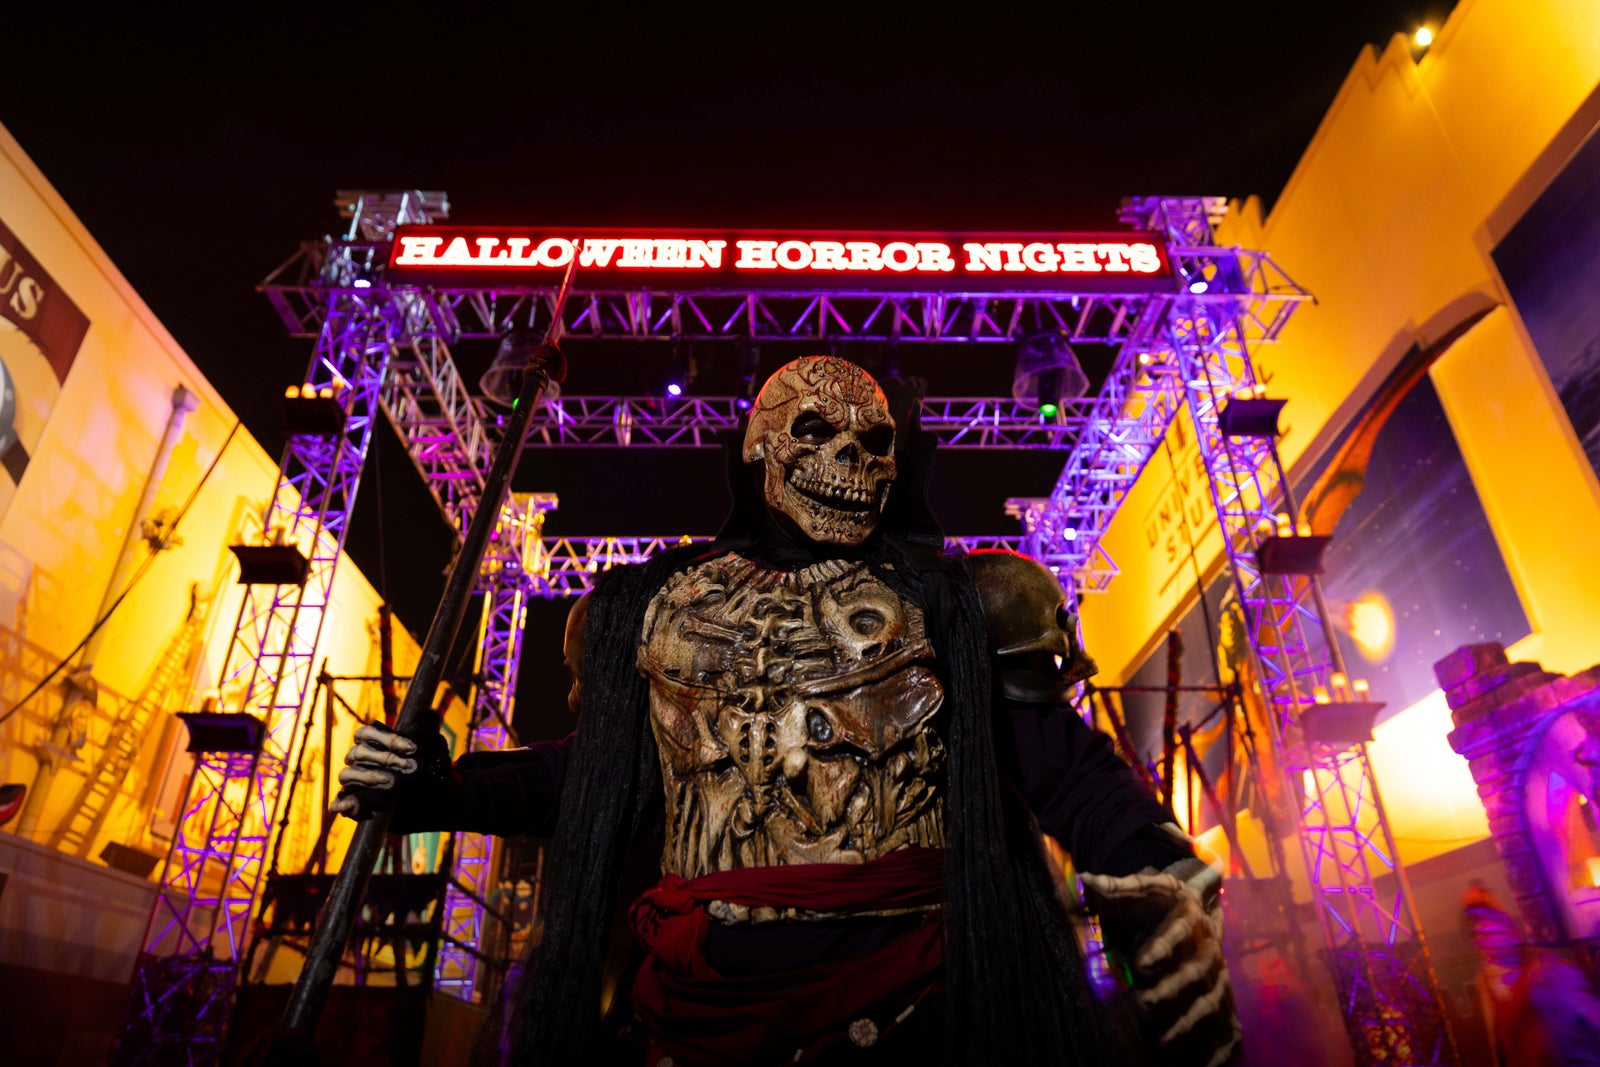 Skeleton in front of Halloween Horror Nights sign at Universal Orlando